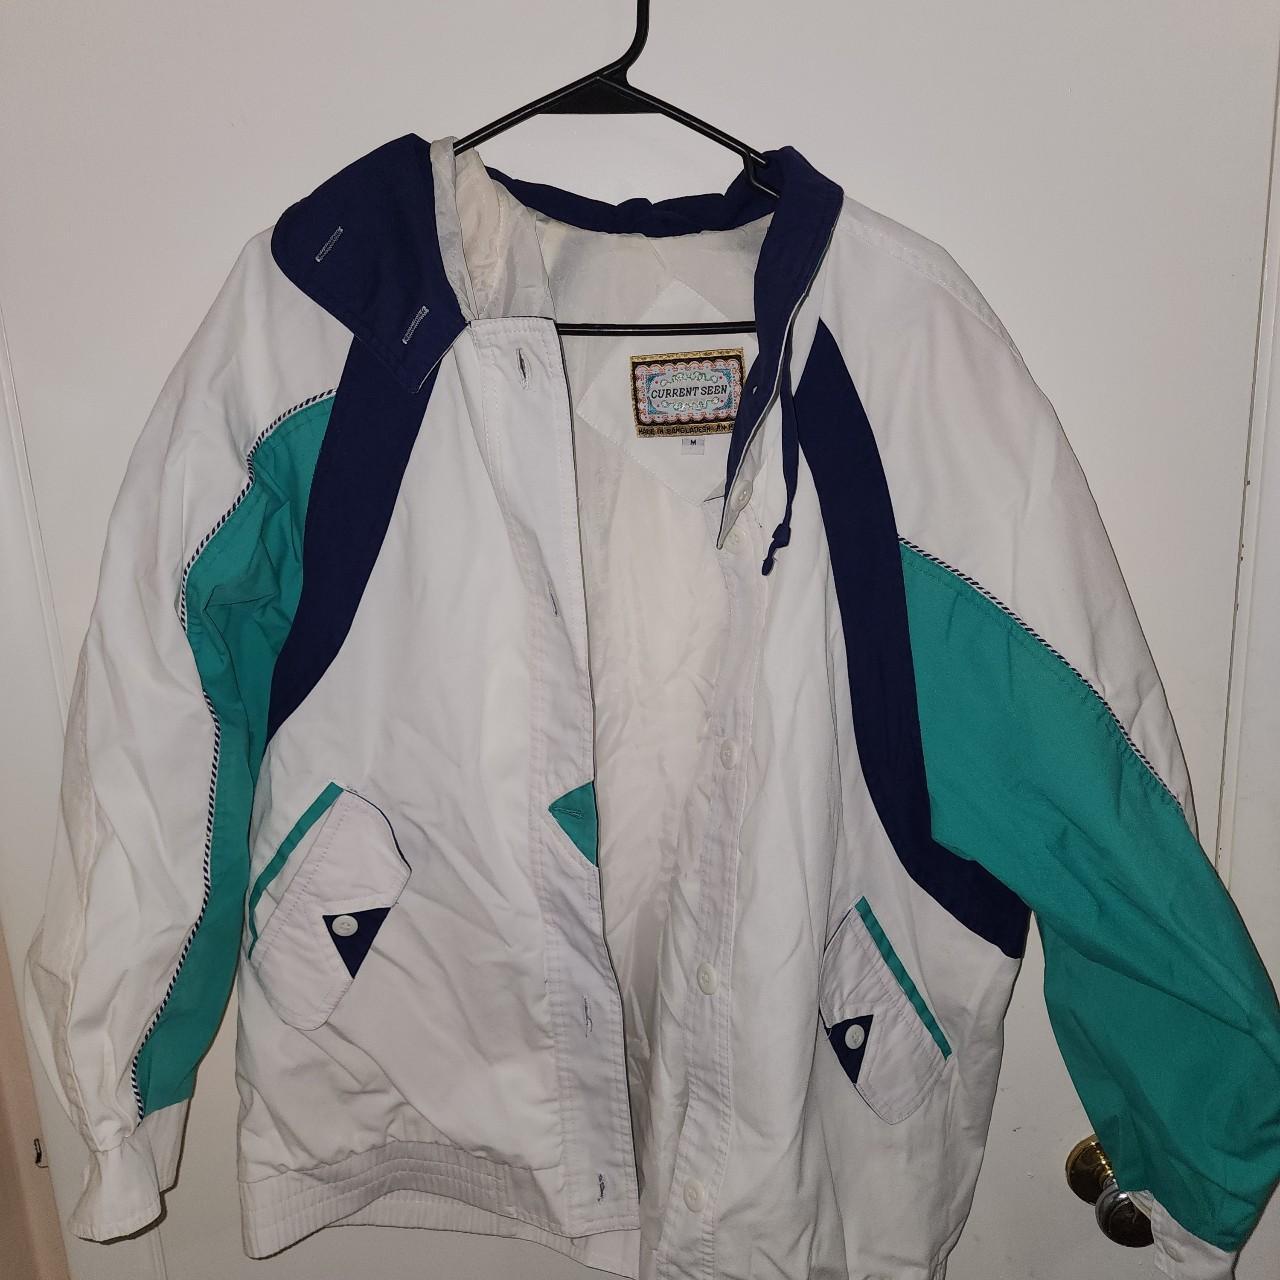 Current Seen Men's White and Blue Jacket